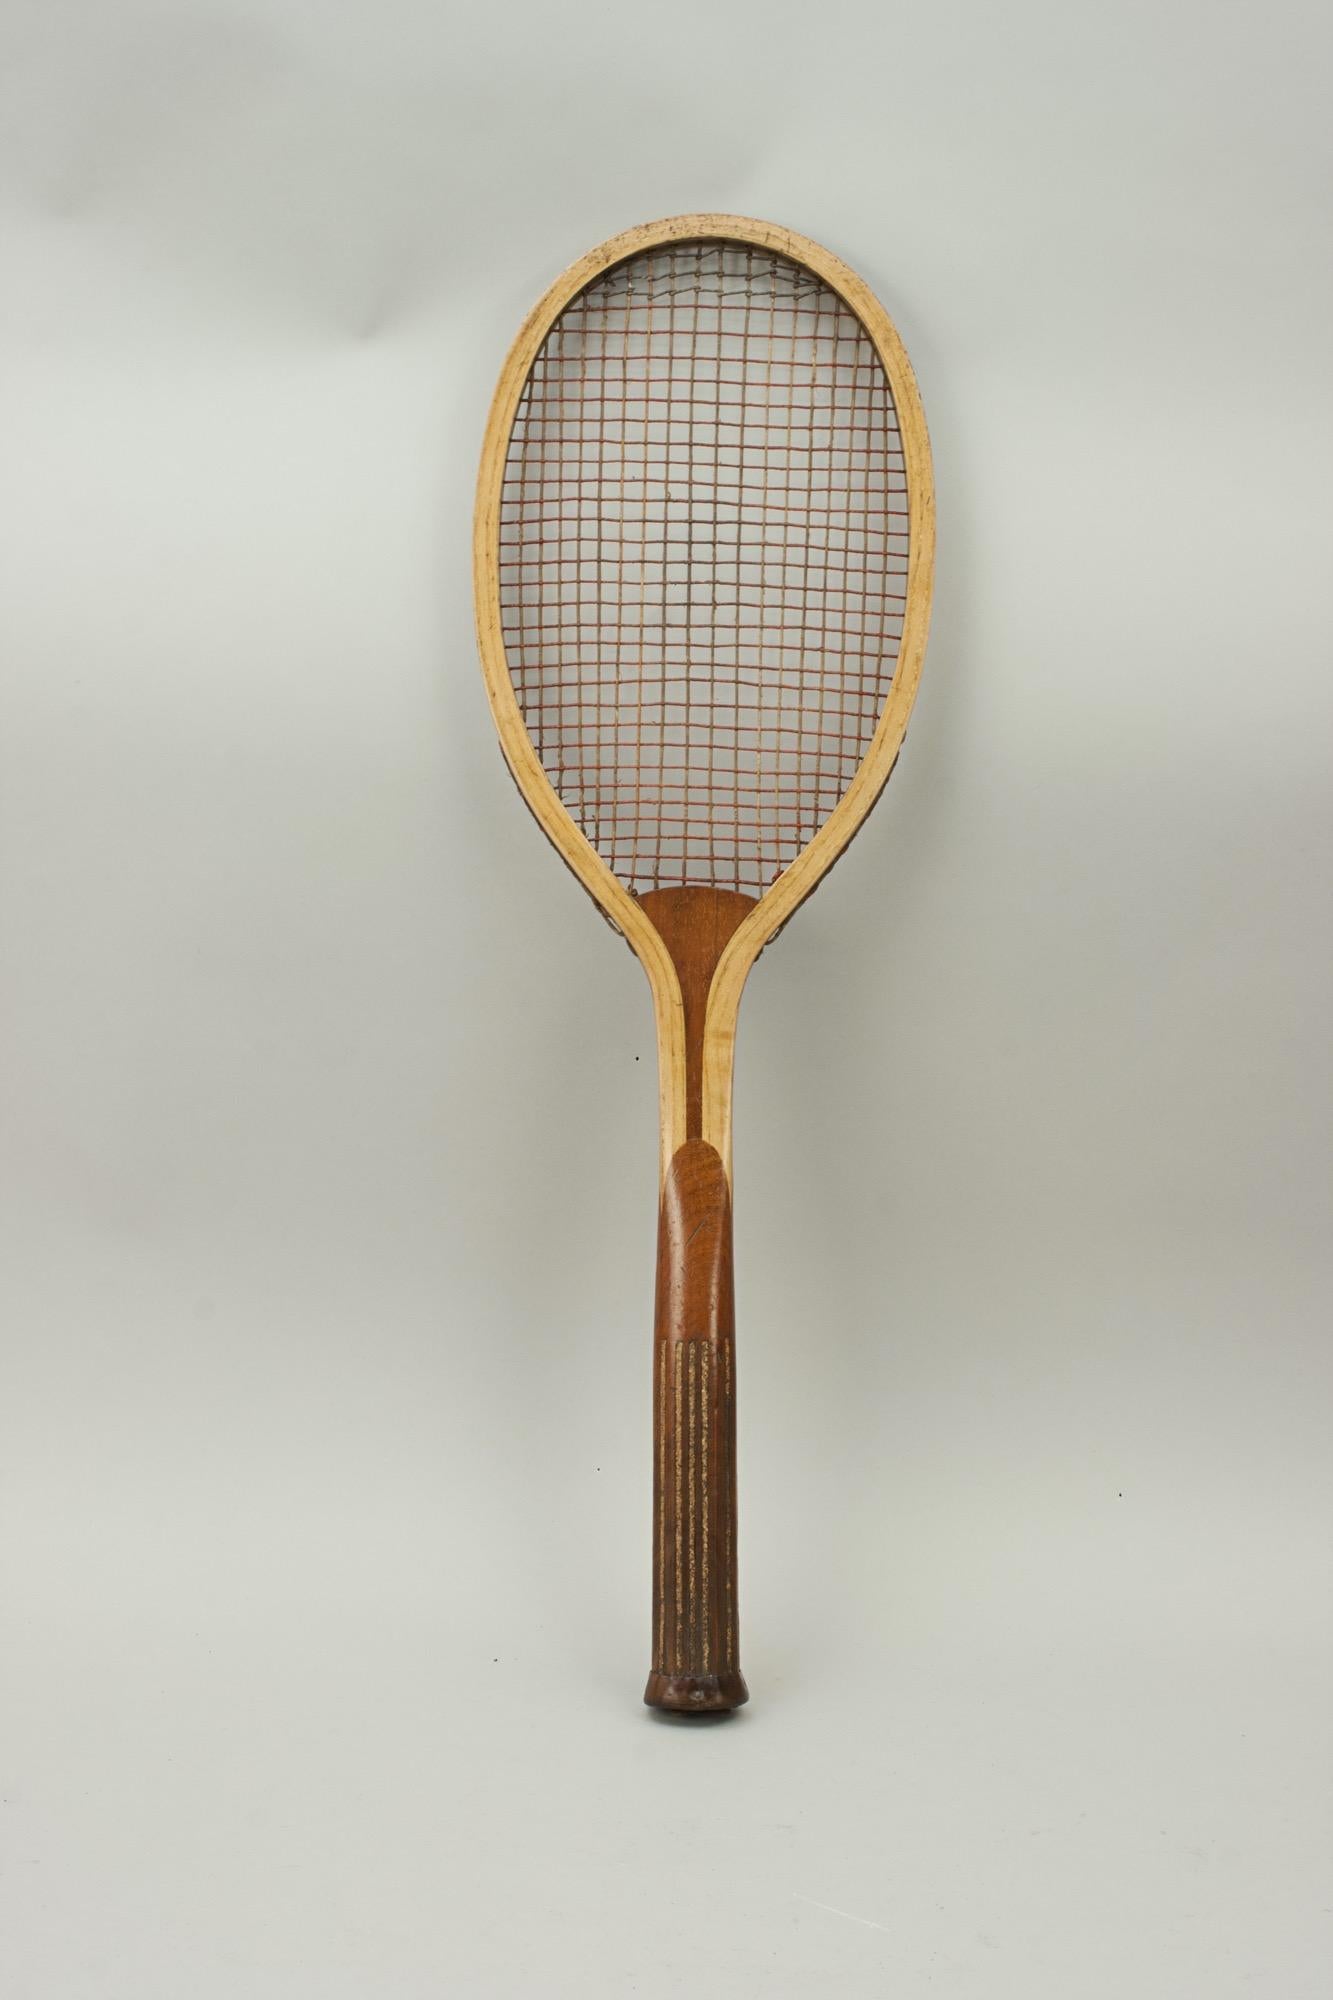 Ash Lawn tennis racket with cork grip.
A very good and collectable lawn tennis racket with unusual patent grip. This style of cork grip is usually found on rackets manufactured by George Bussey & Co., although this racket for some reason does not